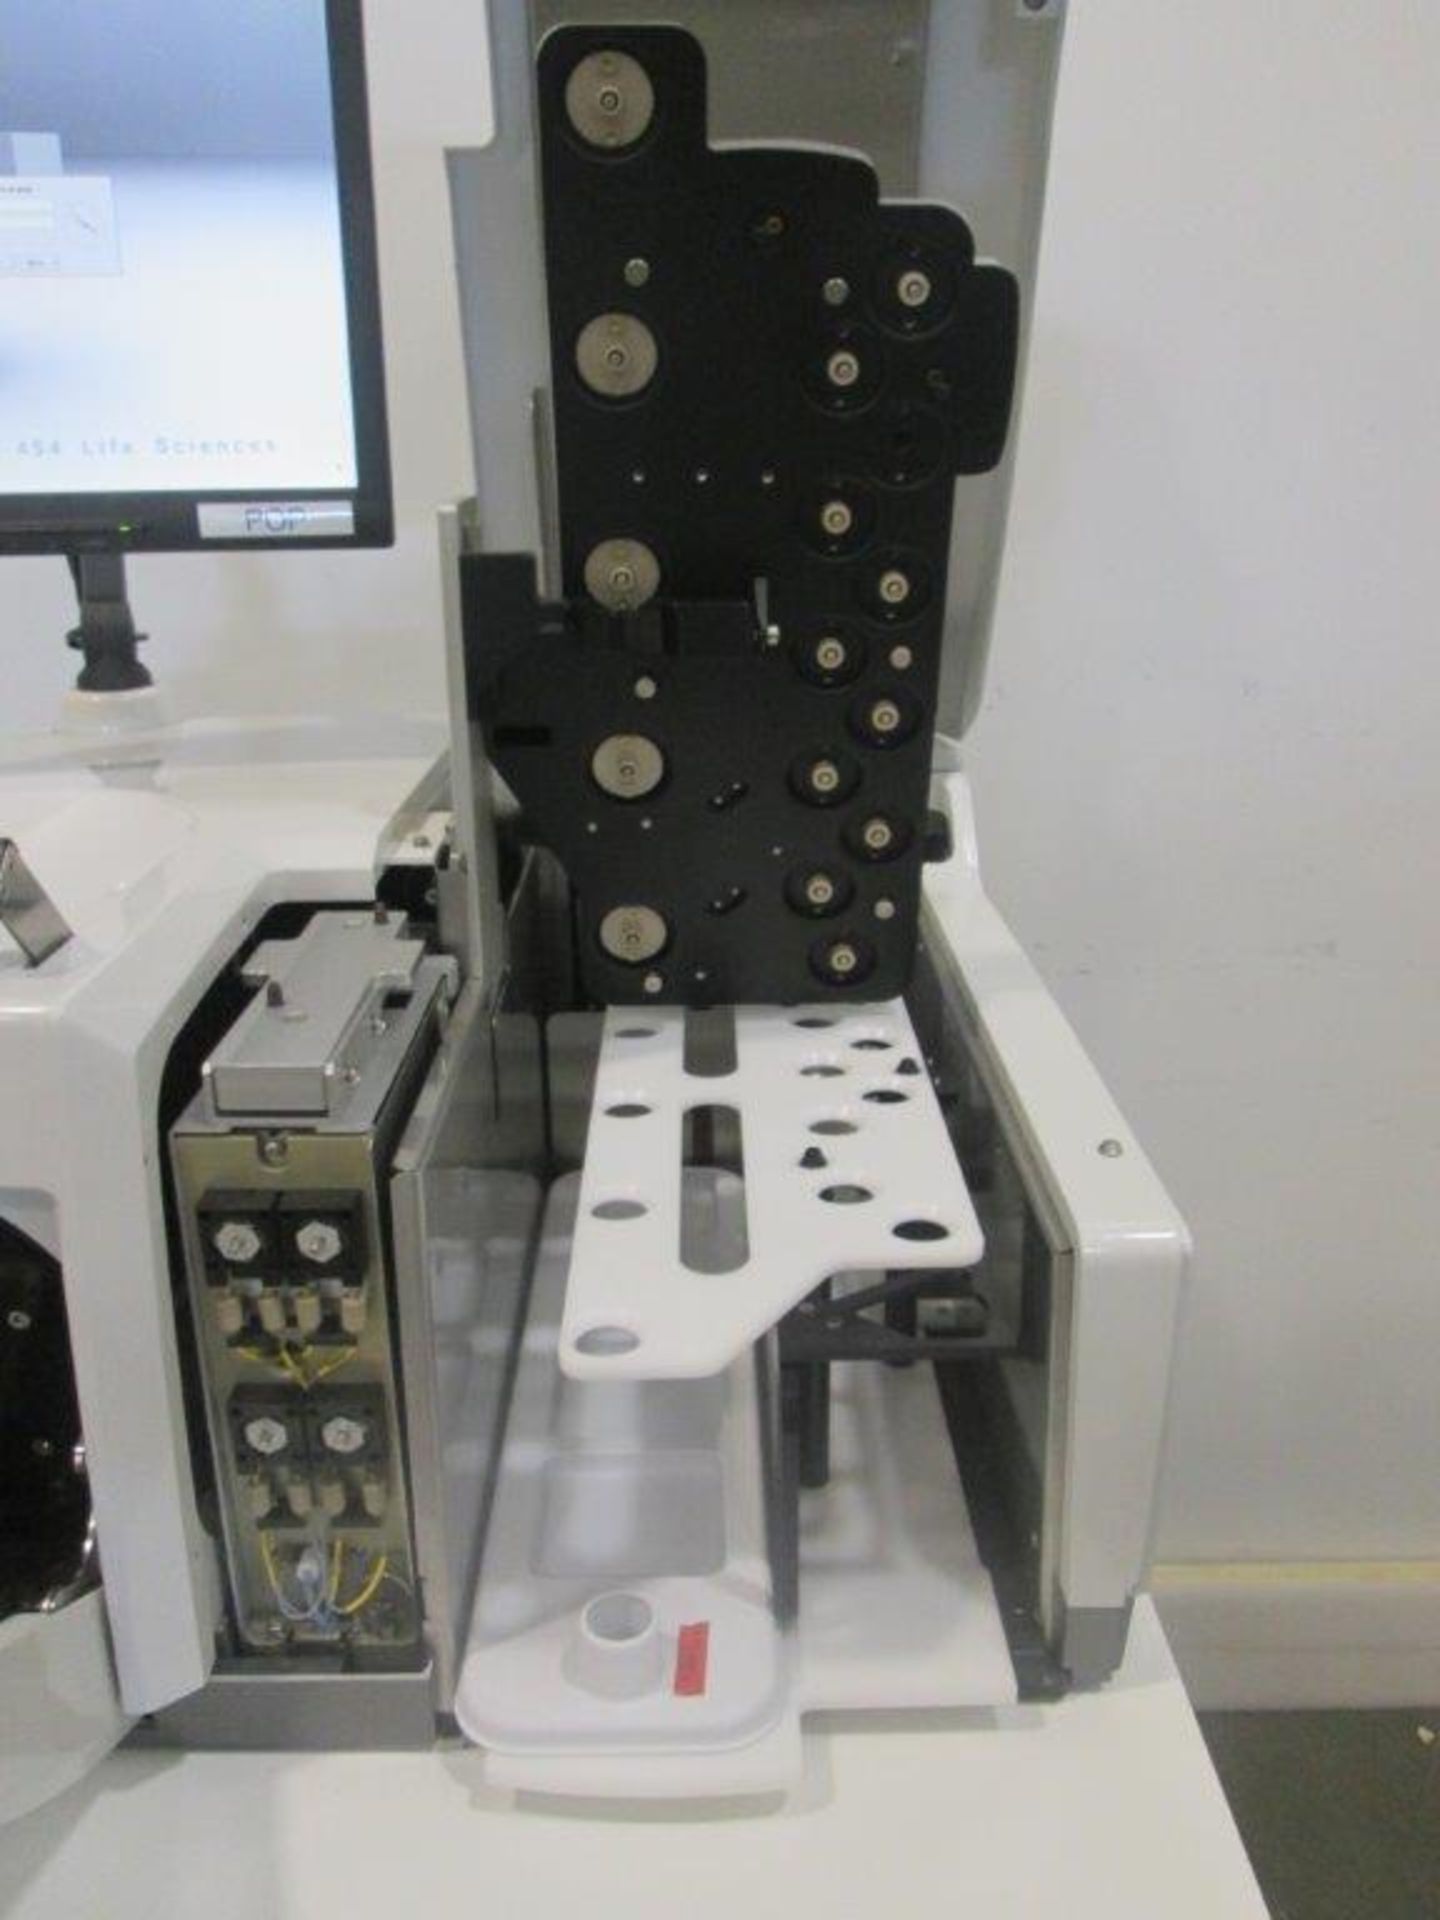 Roche 454 FLX+ Genome Sequencer - Image 3 of 10